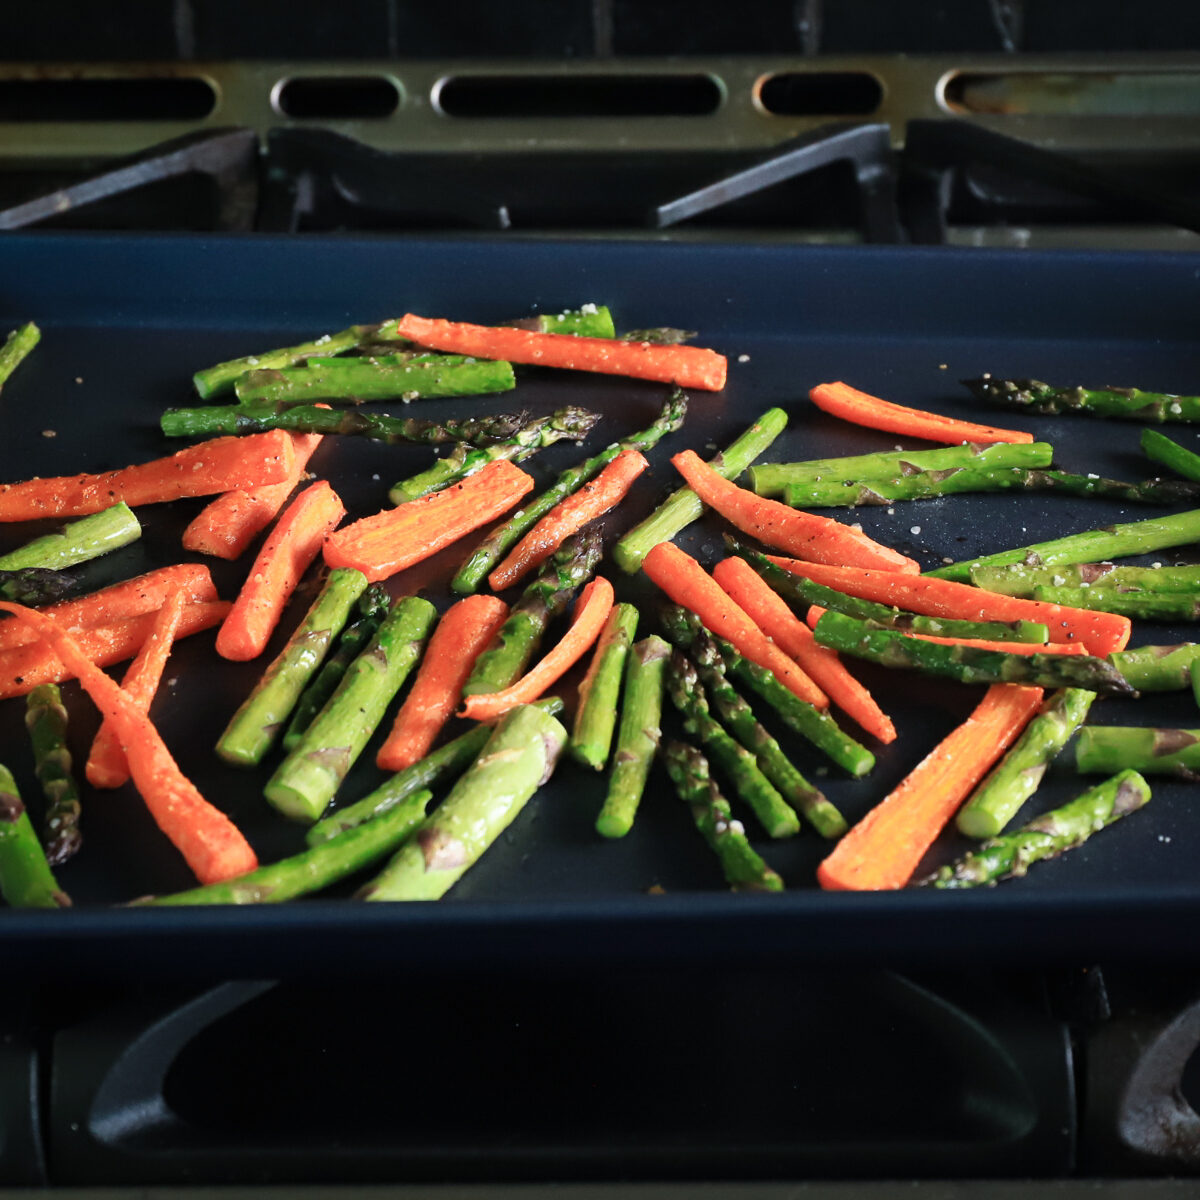 The blue pan holds the roasted carrots and asparagus pieces. You can see they are deeper in color and have a few brown spots.